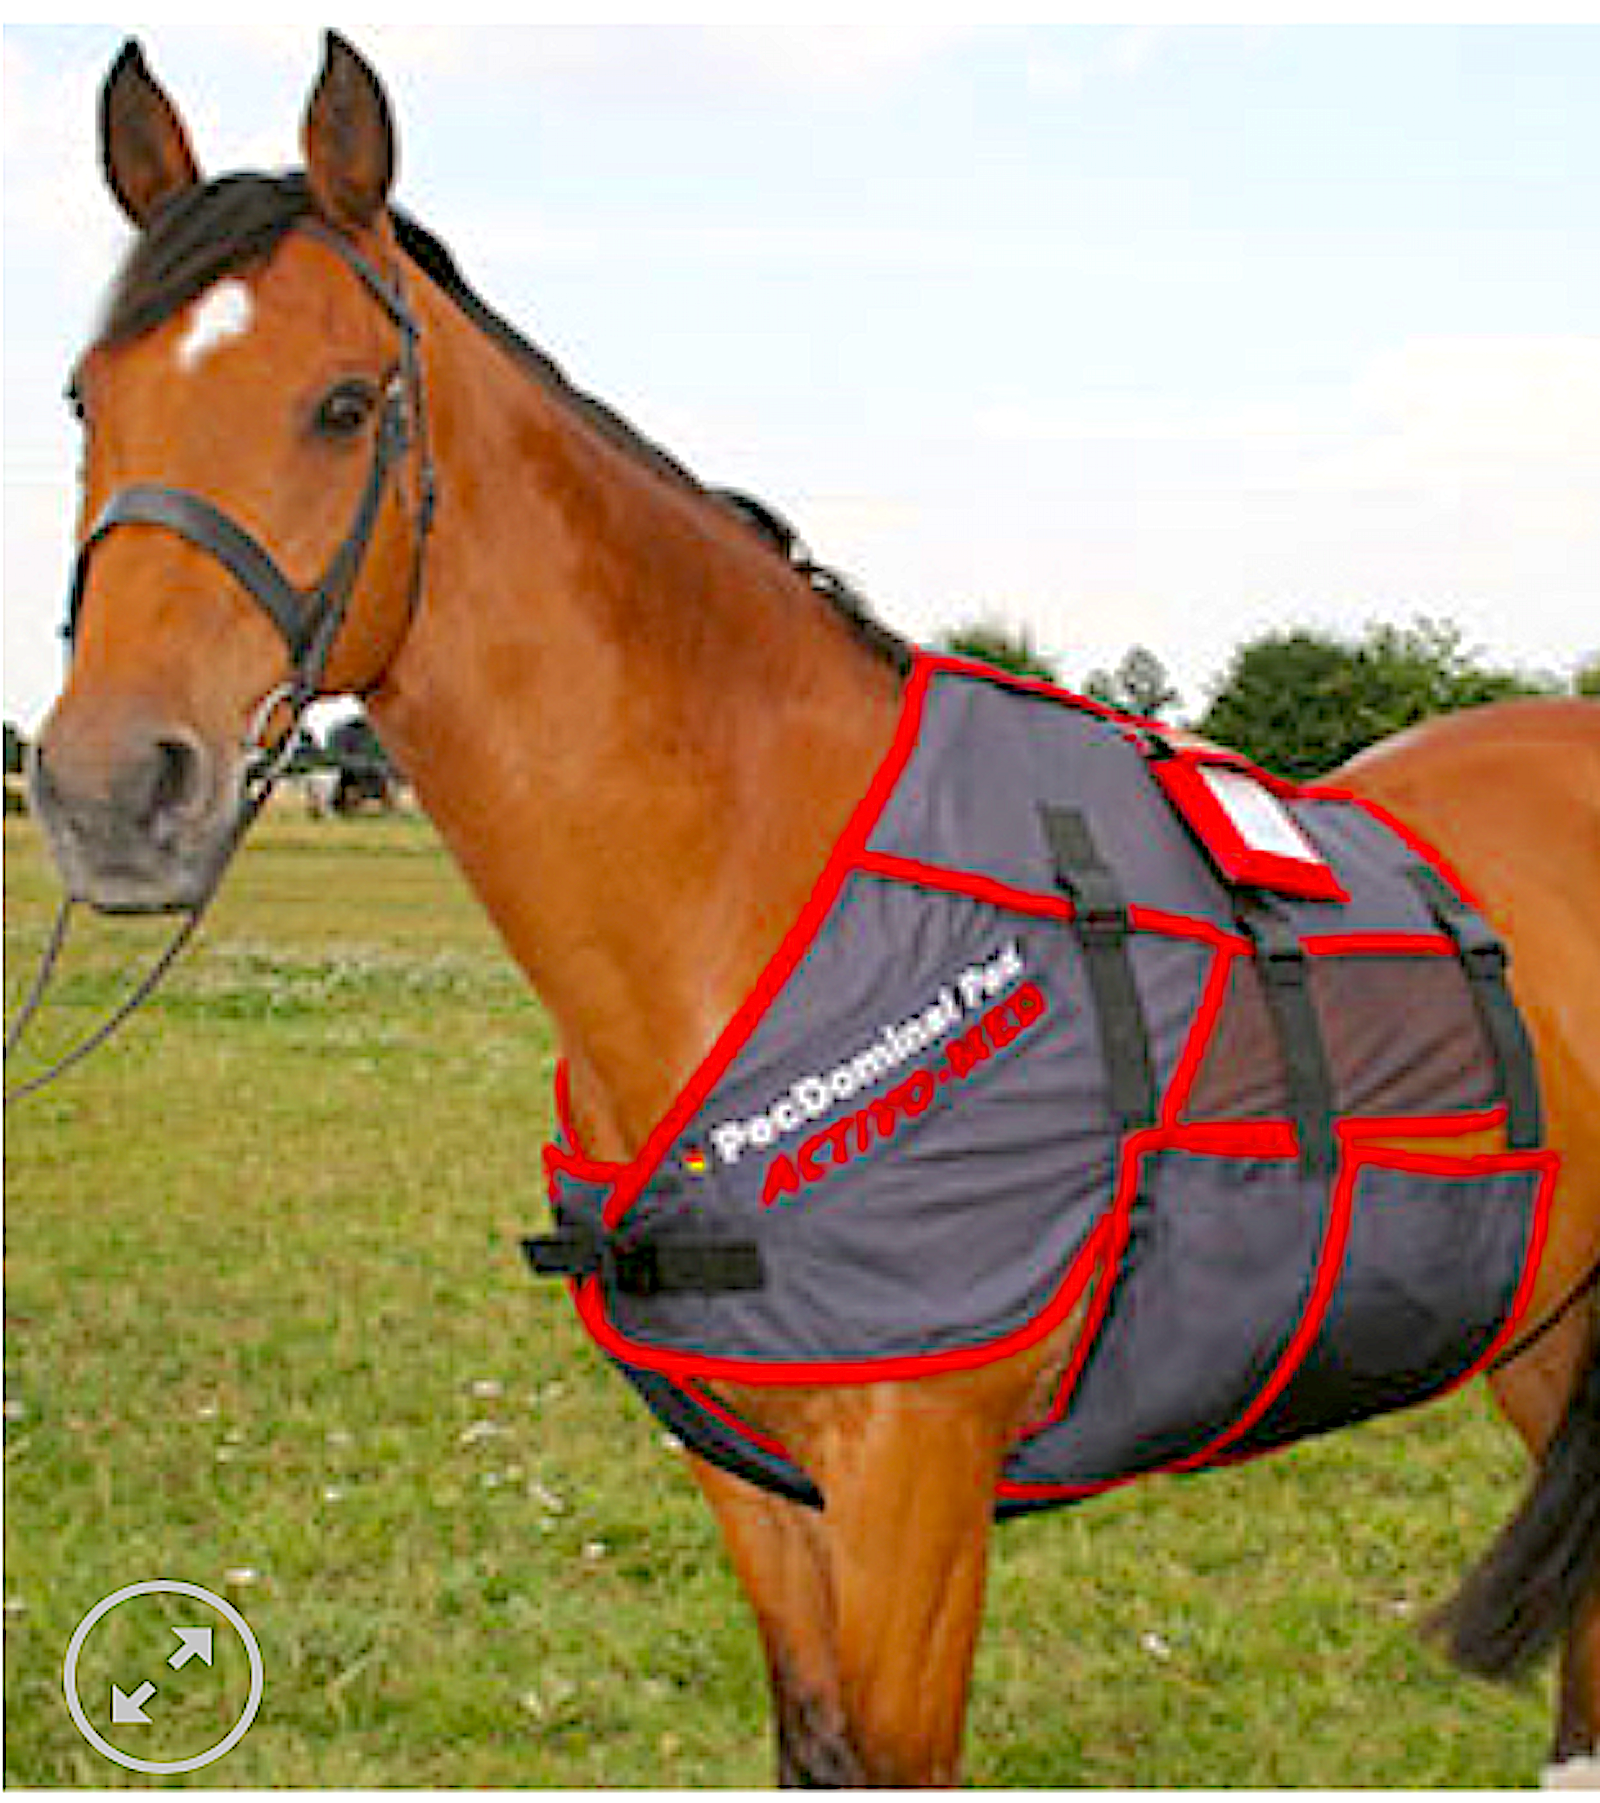 FMBS THERAPY SYSTEMS-UK: providing leading technical products for horses - Vital Vet